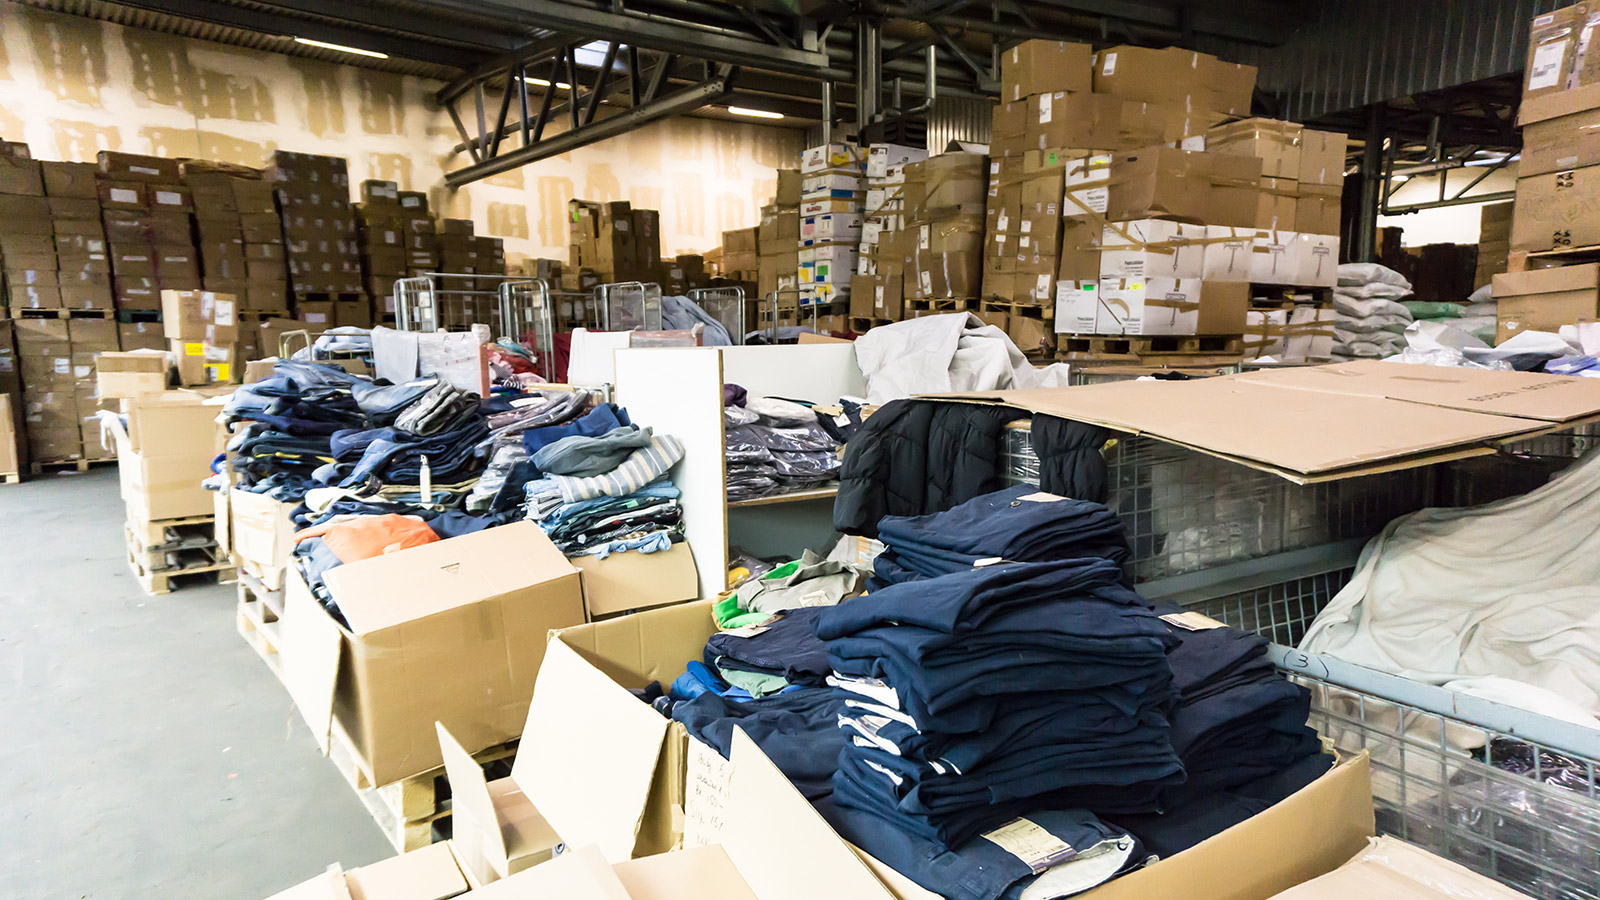 Clothing in Messy Warehouse